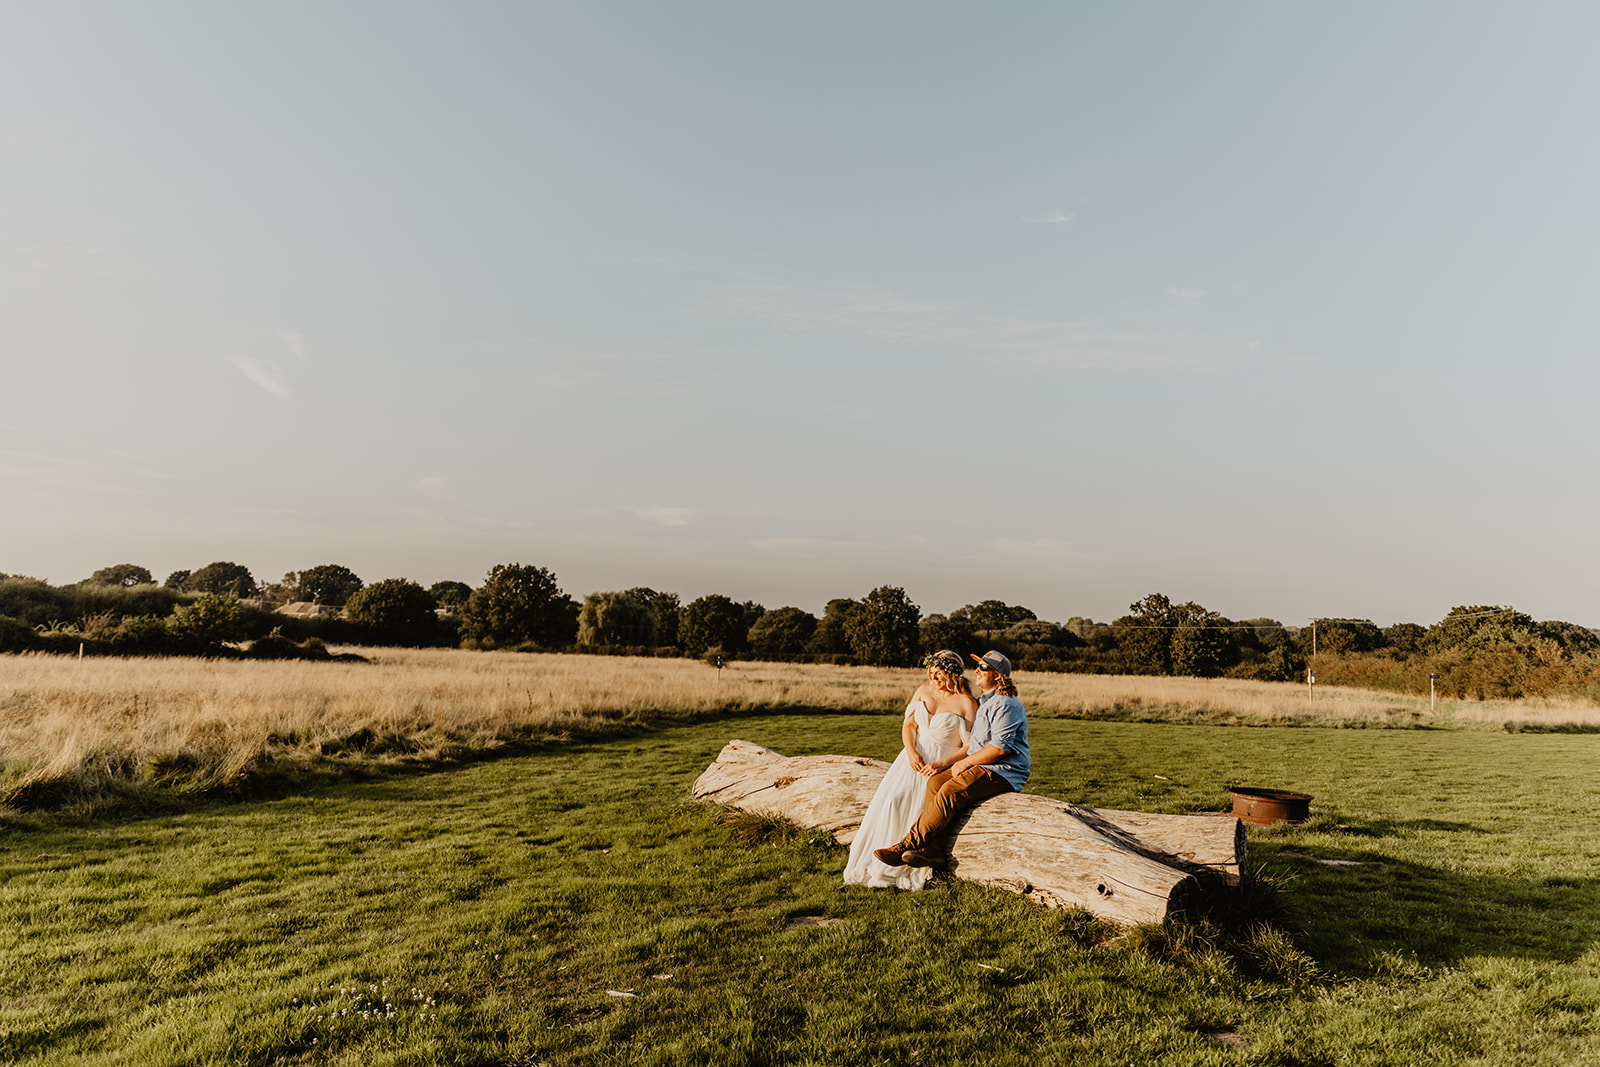 Bride and groom at sunset at a wedding at Mac's Farm in Sussex. By OliveJoy Photography.